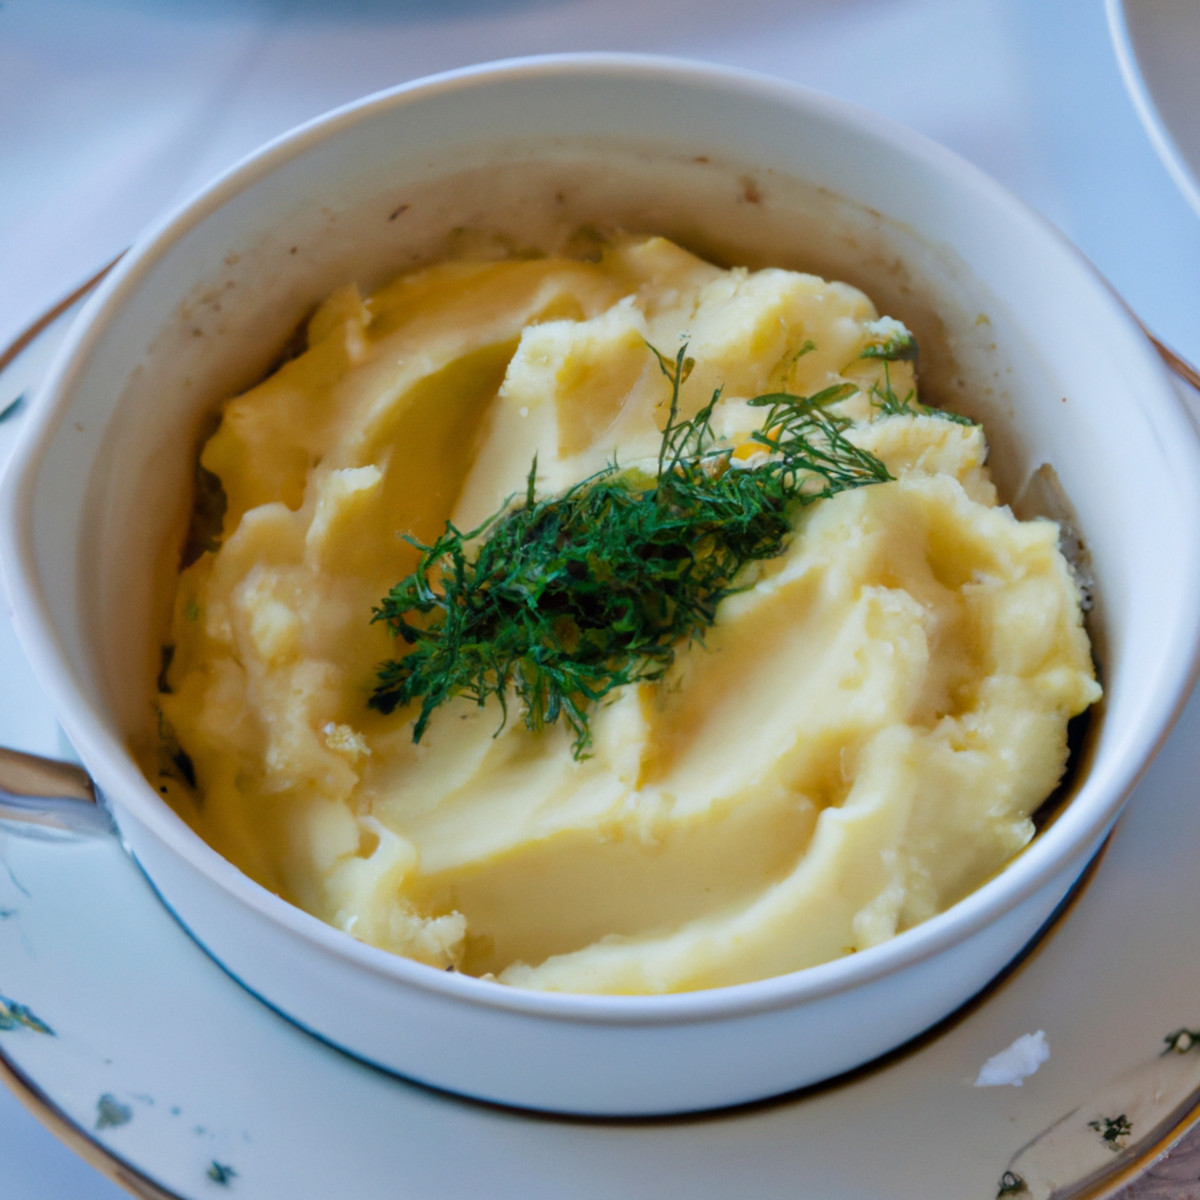 mashed potatoes with onion and dill